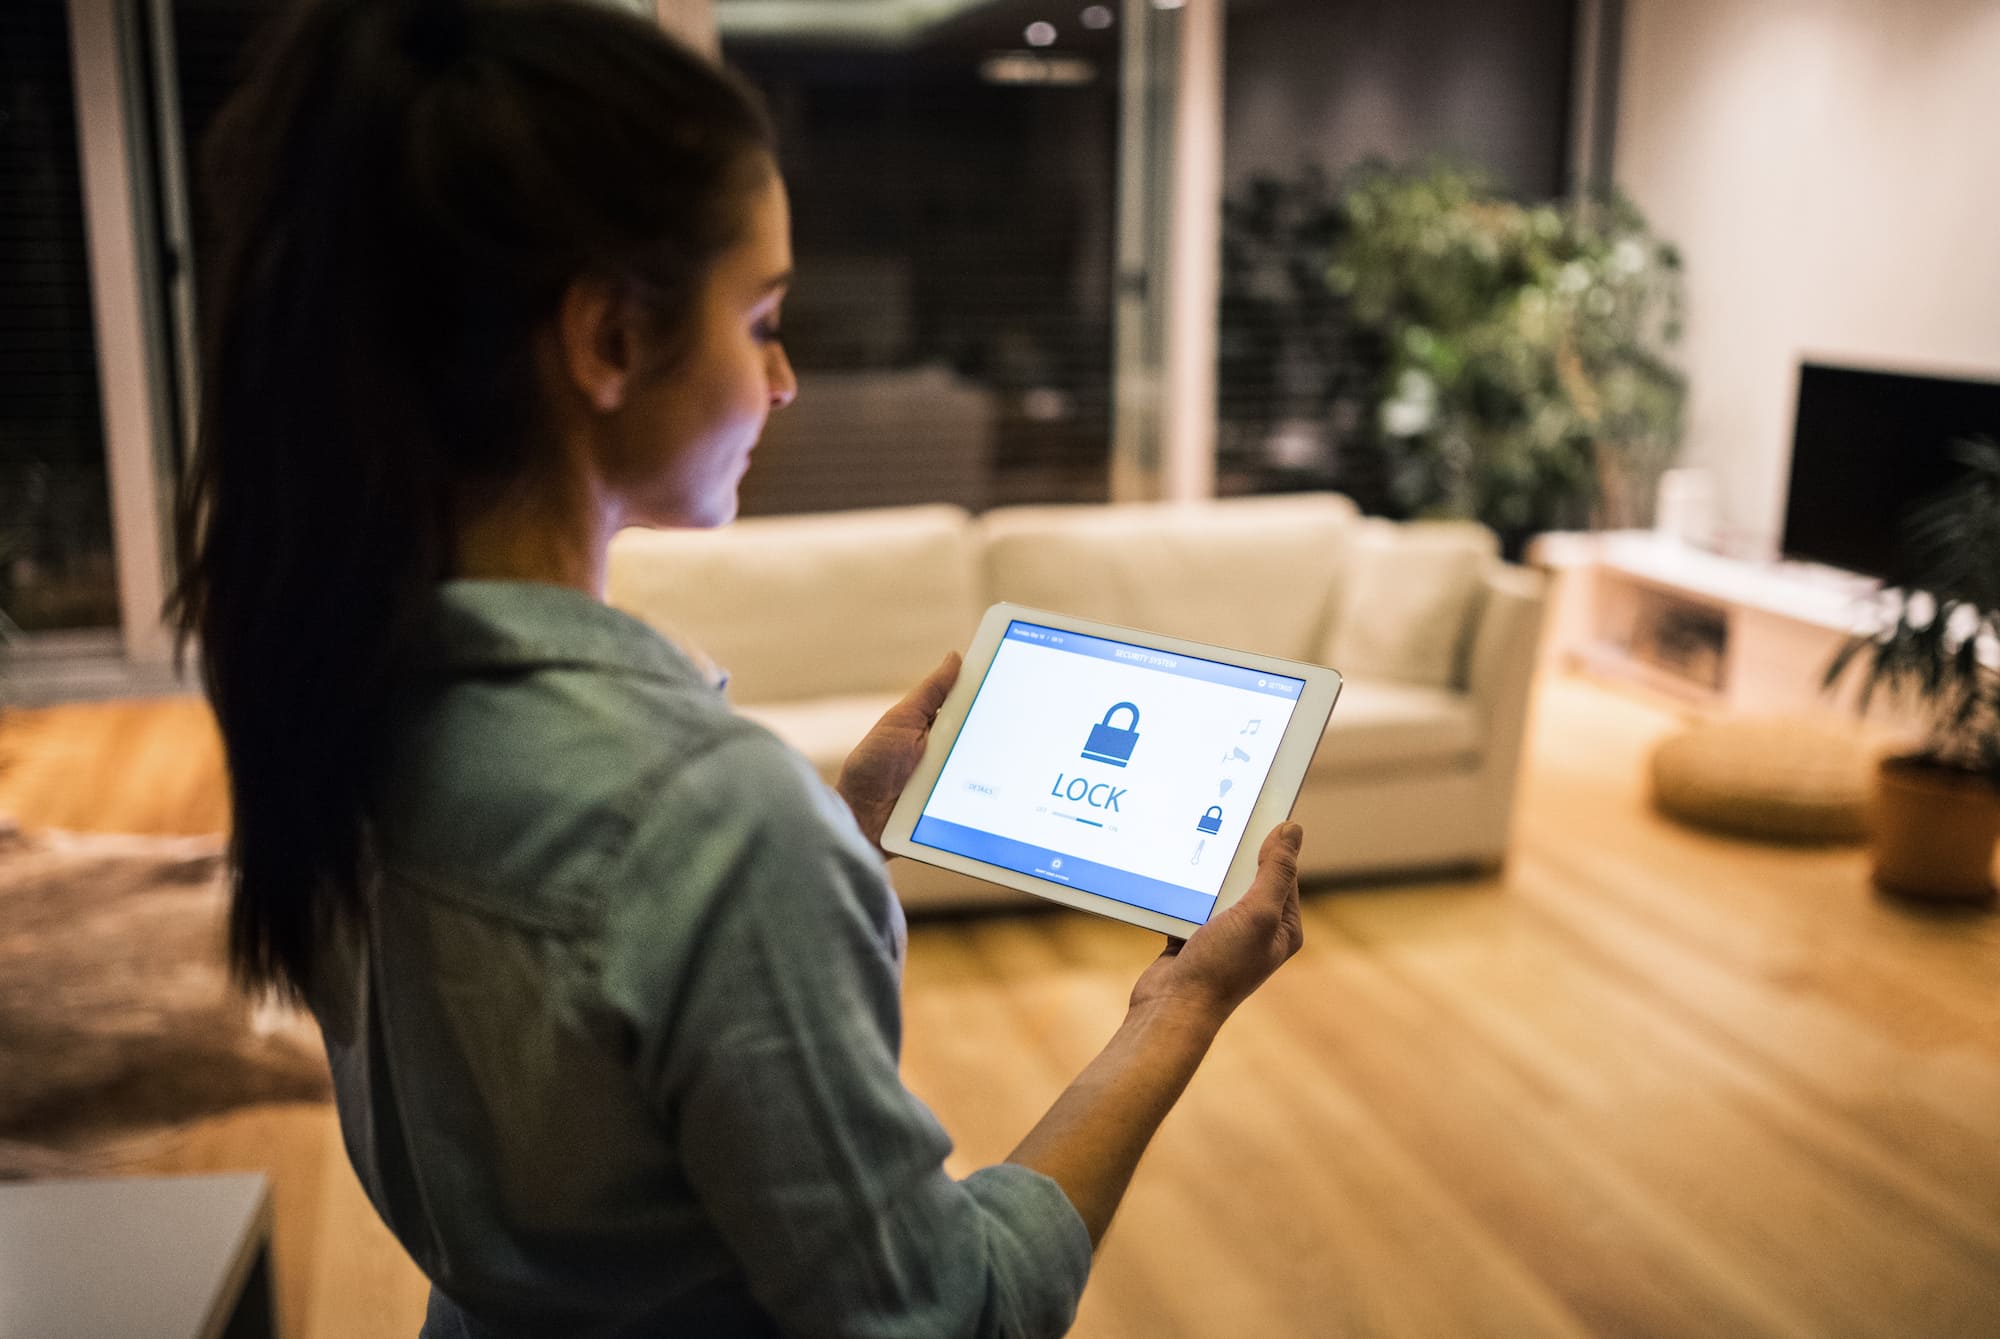 A renter checks her home security system on a tablet